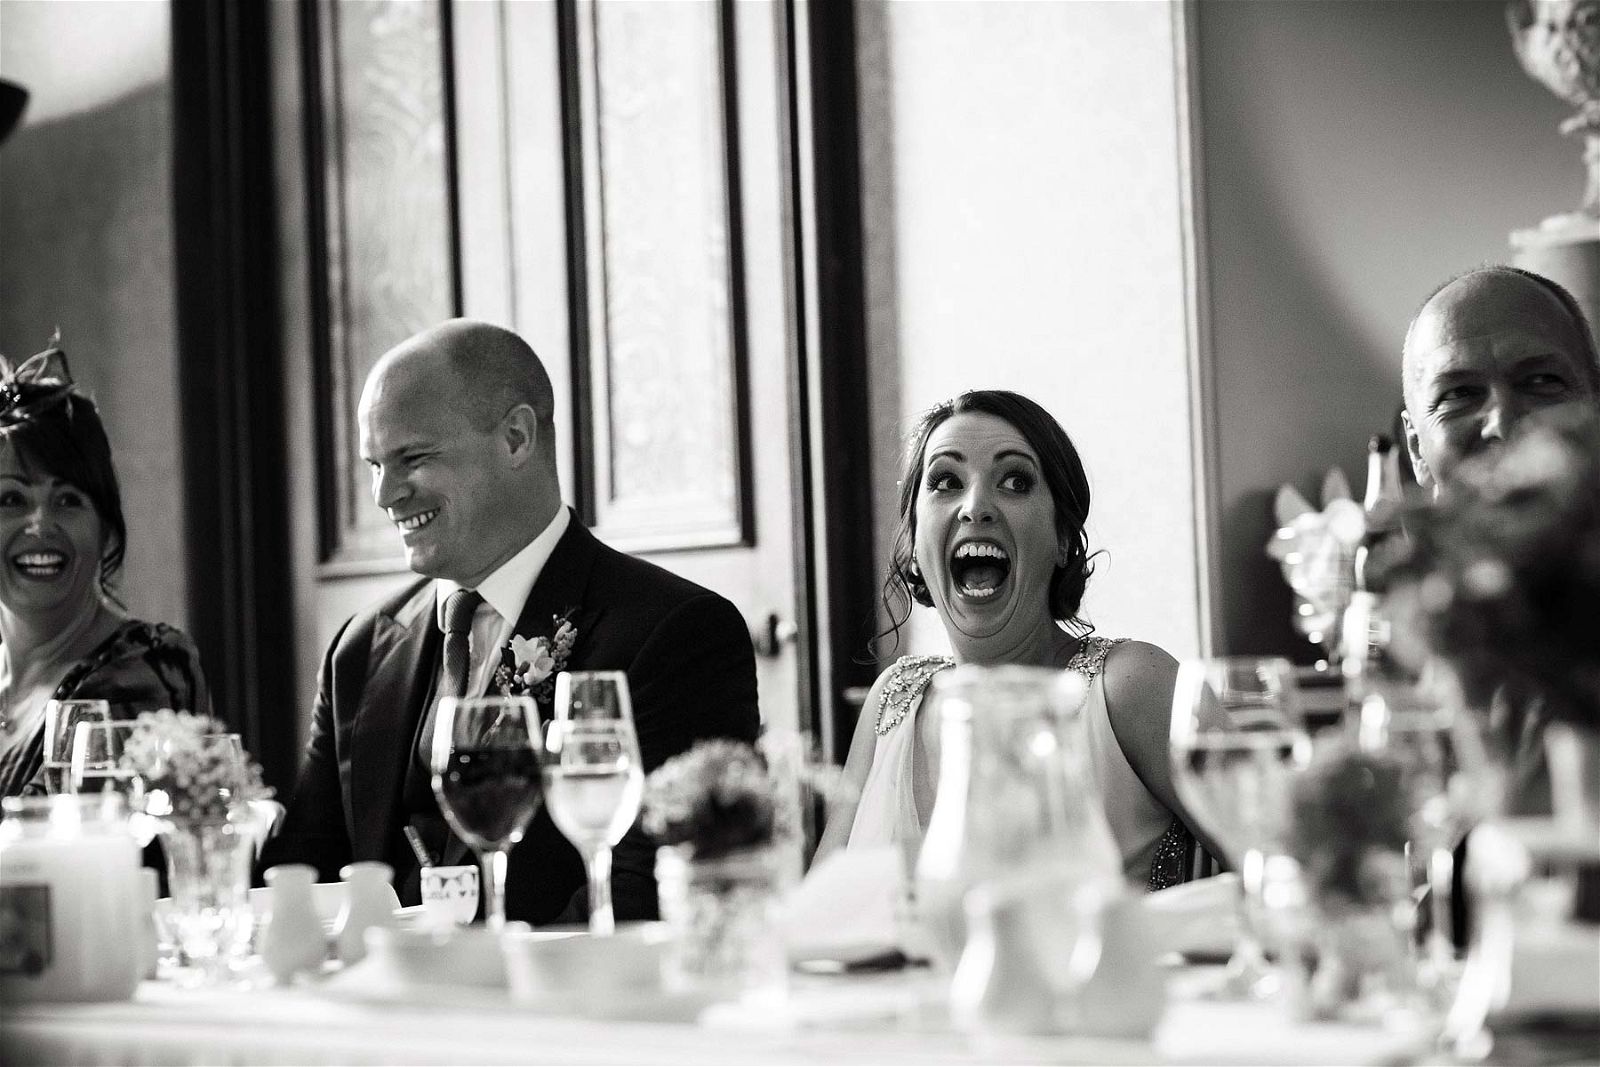 Candid photos that capture the emotion and characters during the entertaining wedding speeches at Sandon Hall in Stafford by Stafford Documentary Wedding Photographer Stuart James